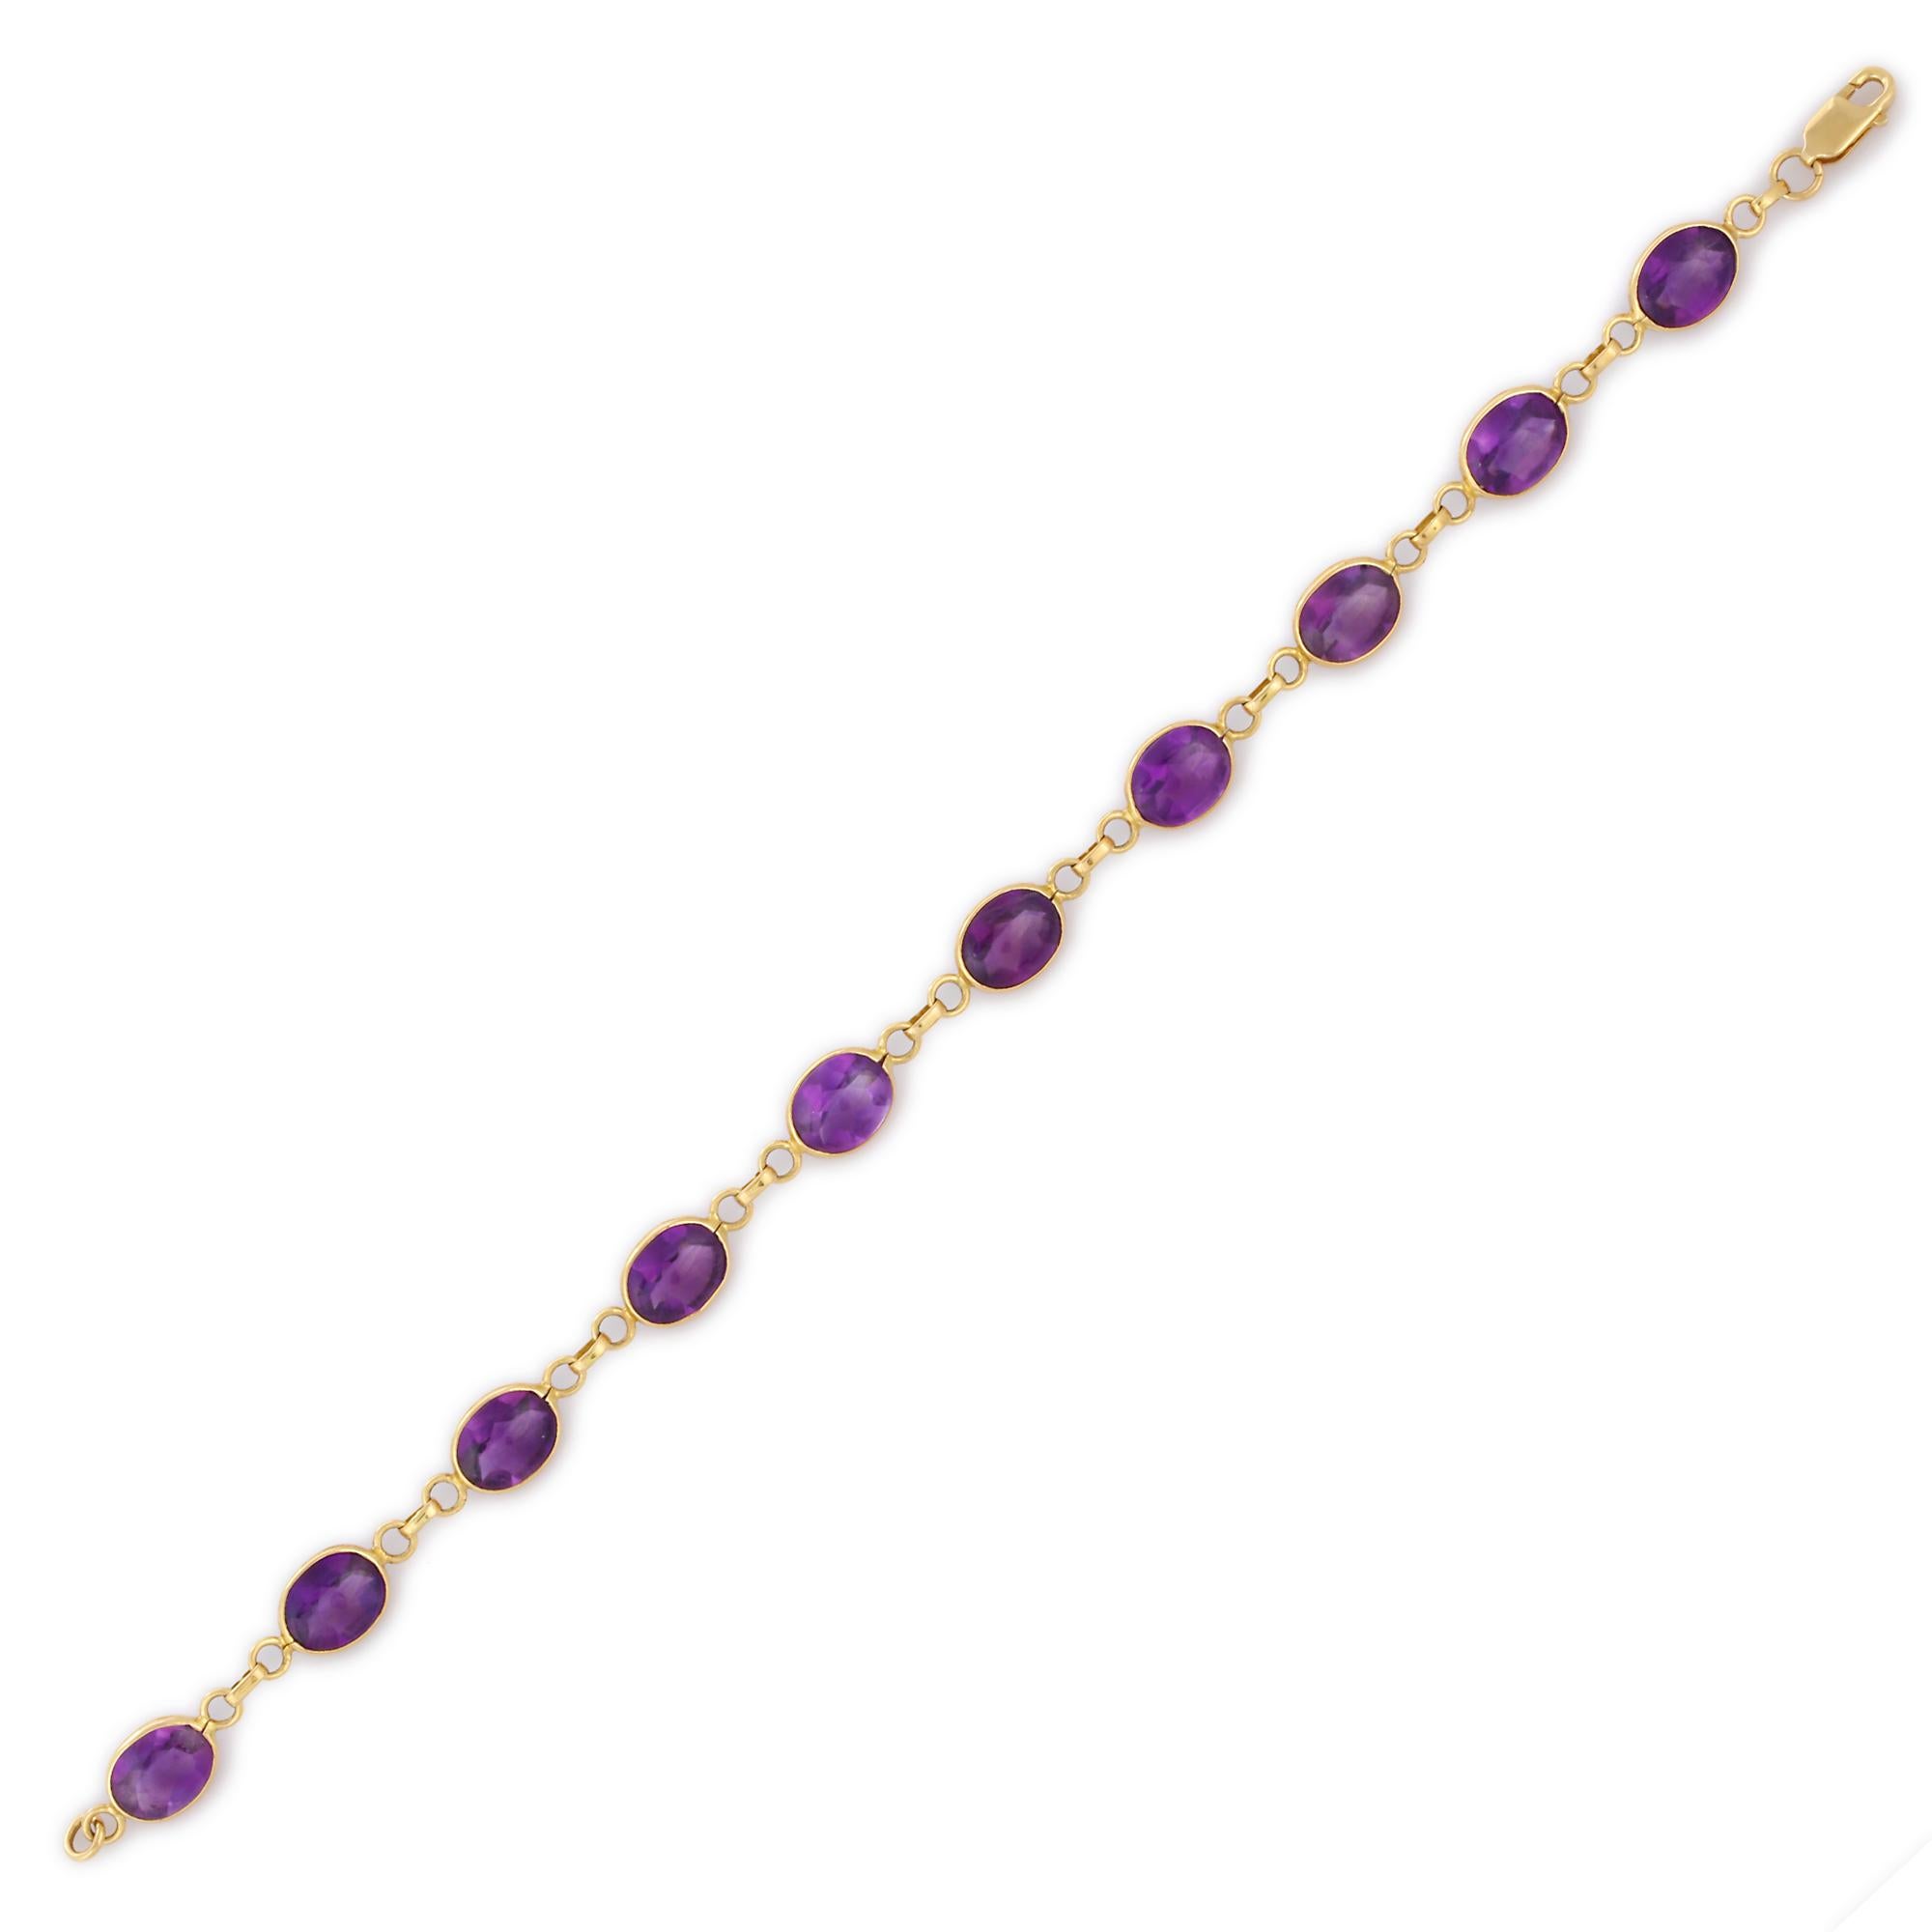 Stackable 17 Ct Amethyst Chain Bracelet in 18 Karat Yellow Gold In New Condition For Sale In Houston, TX